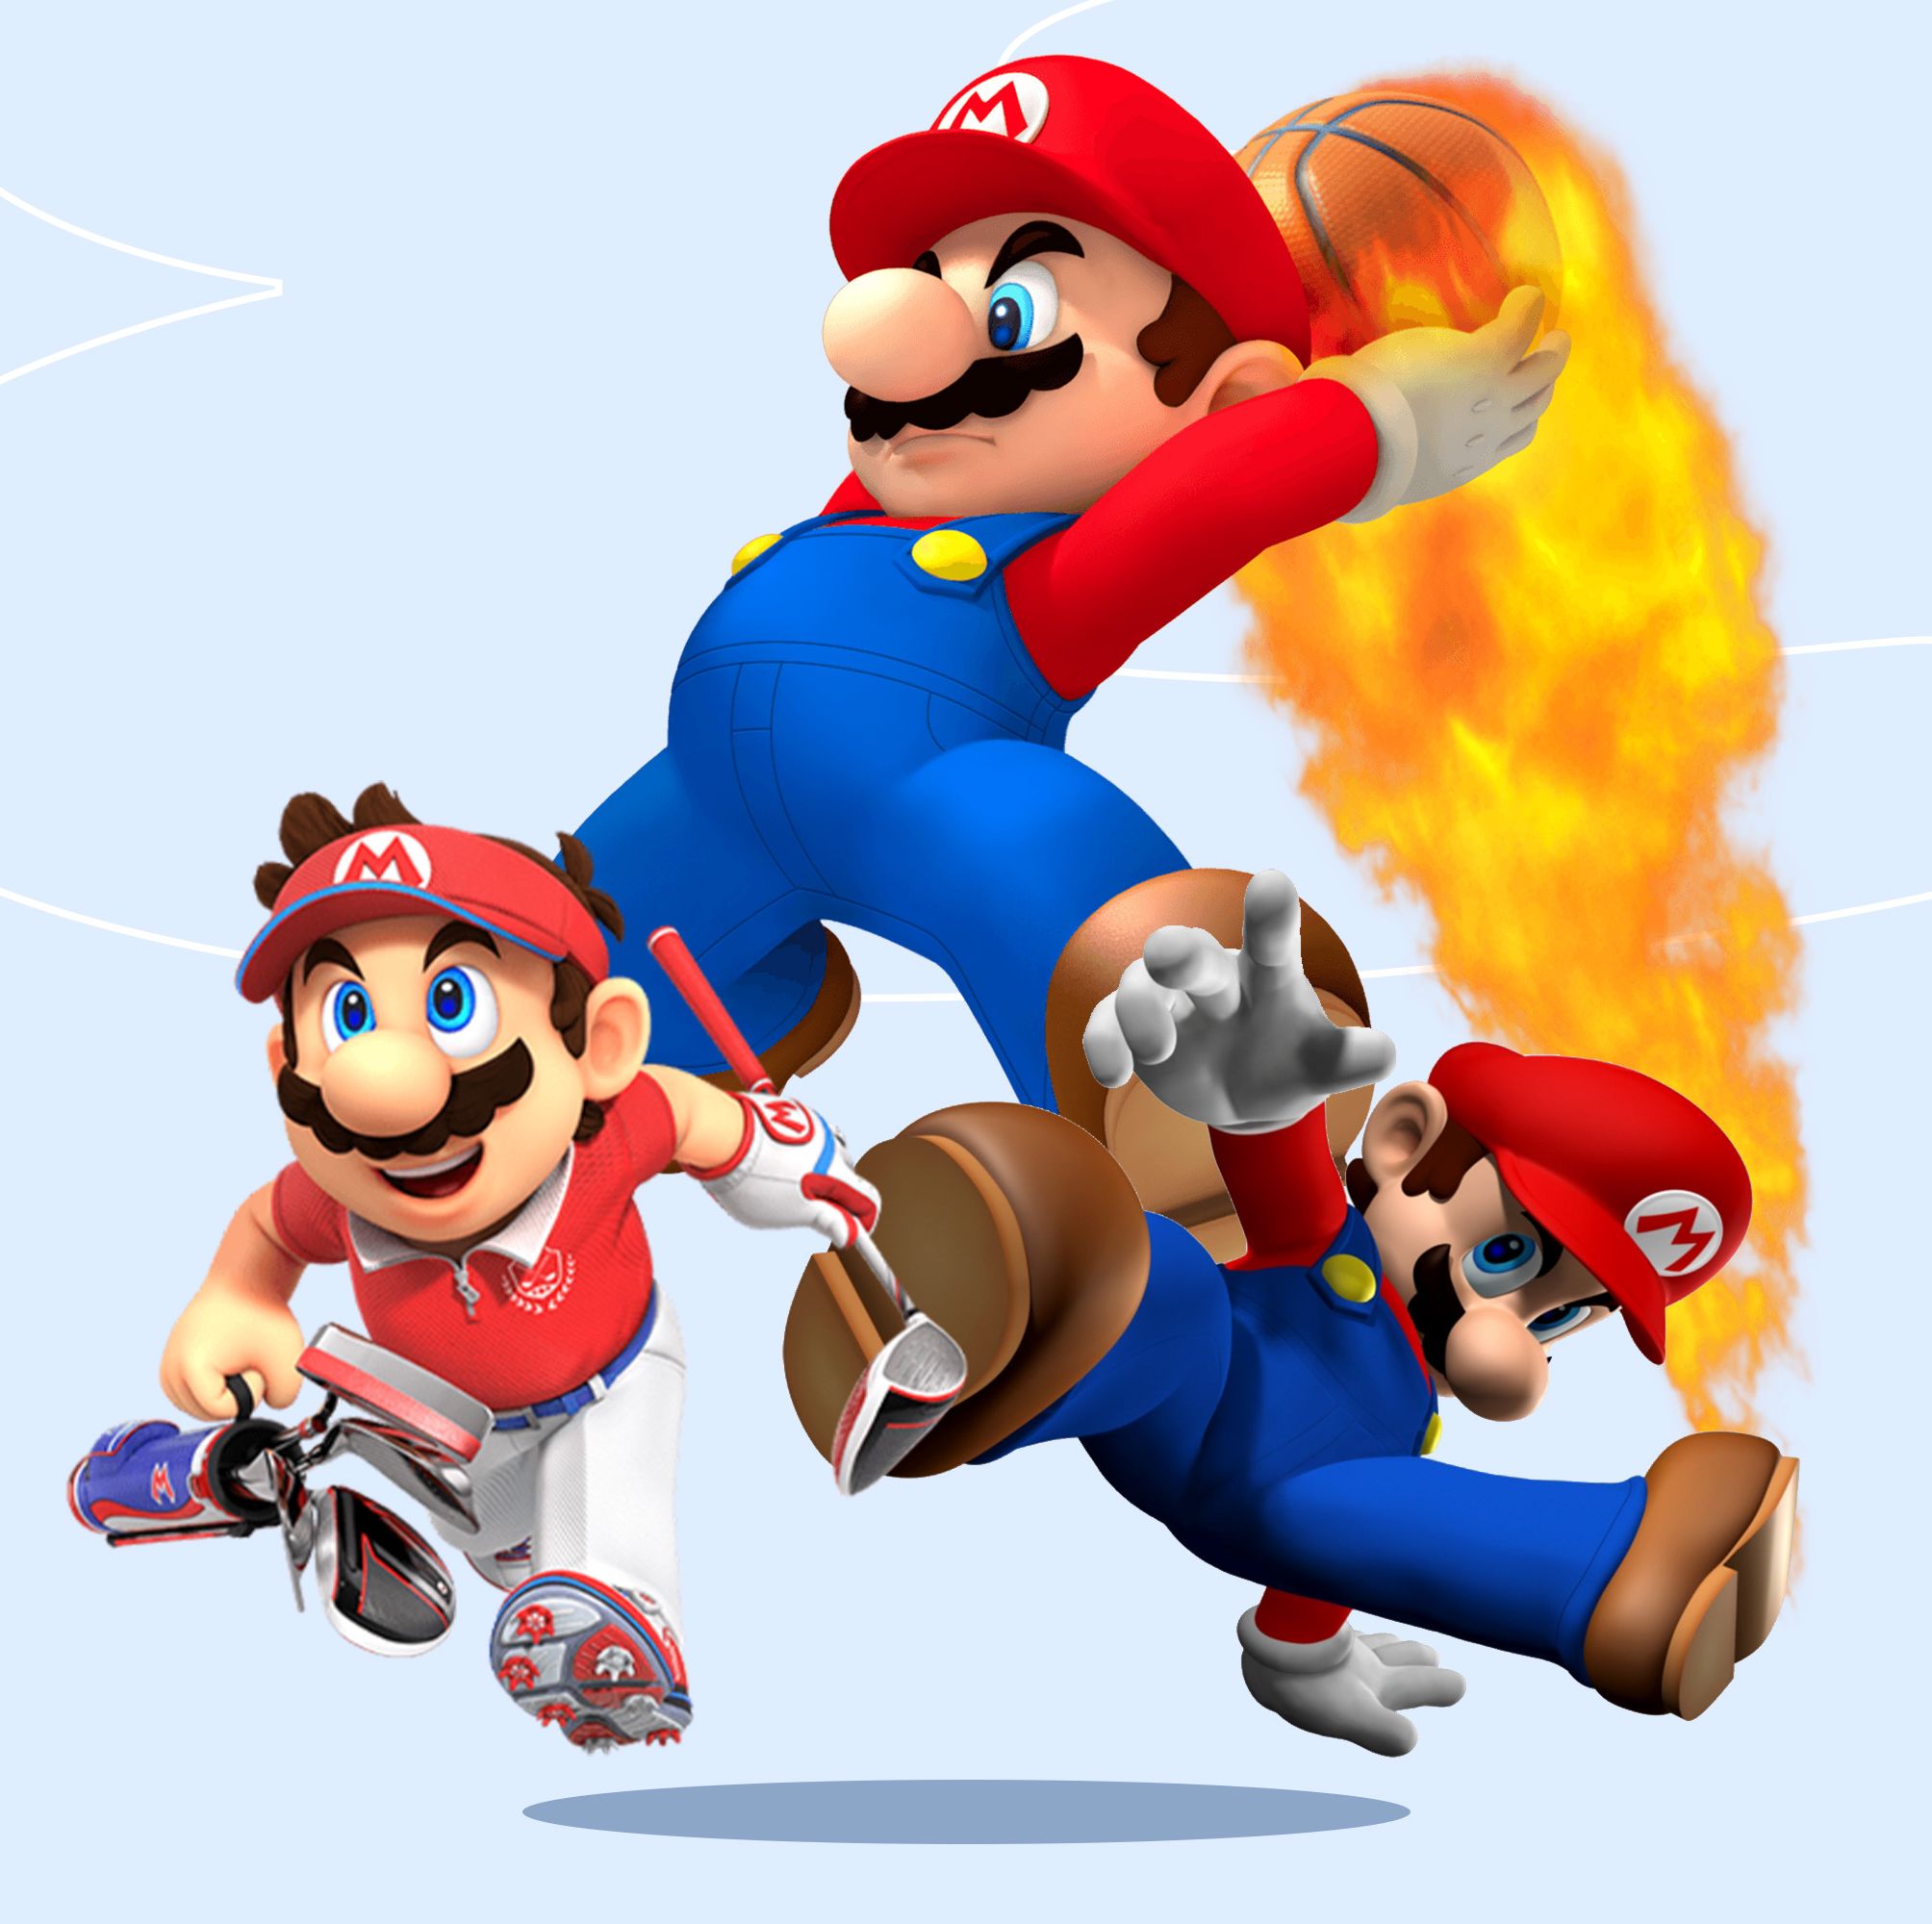 Is Mario Actually Any Good at Sports?